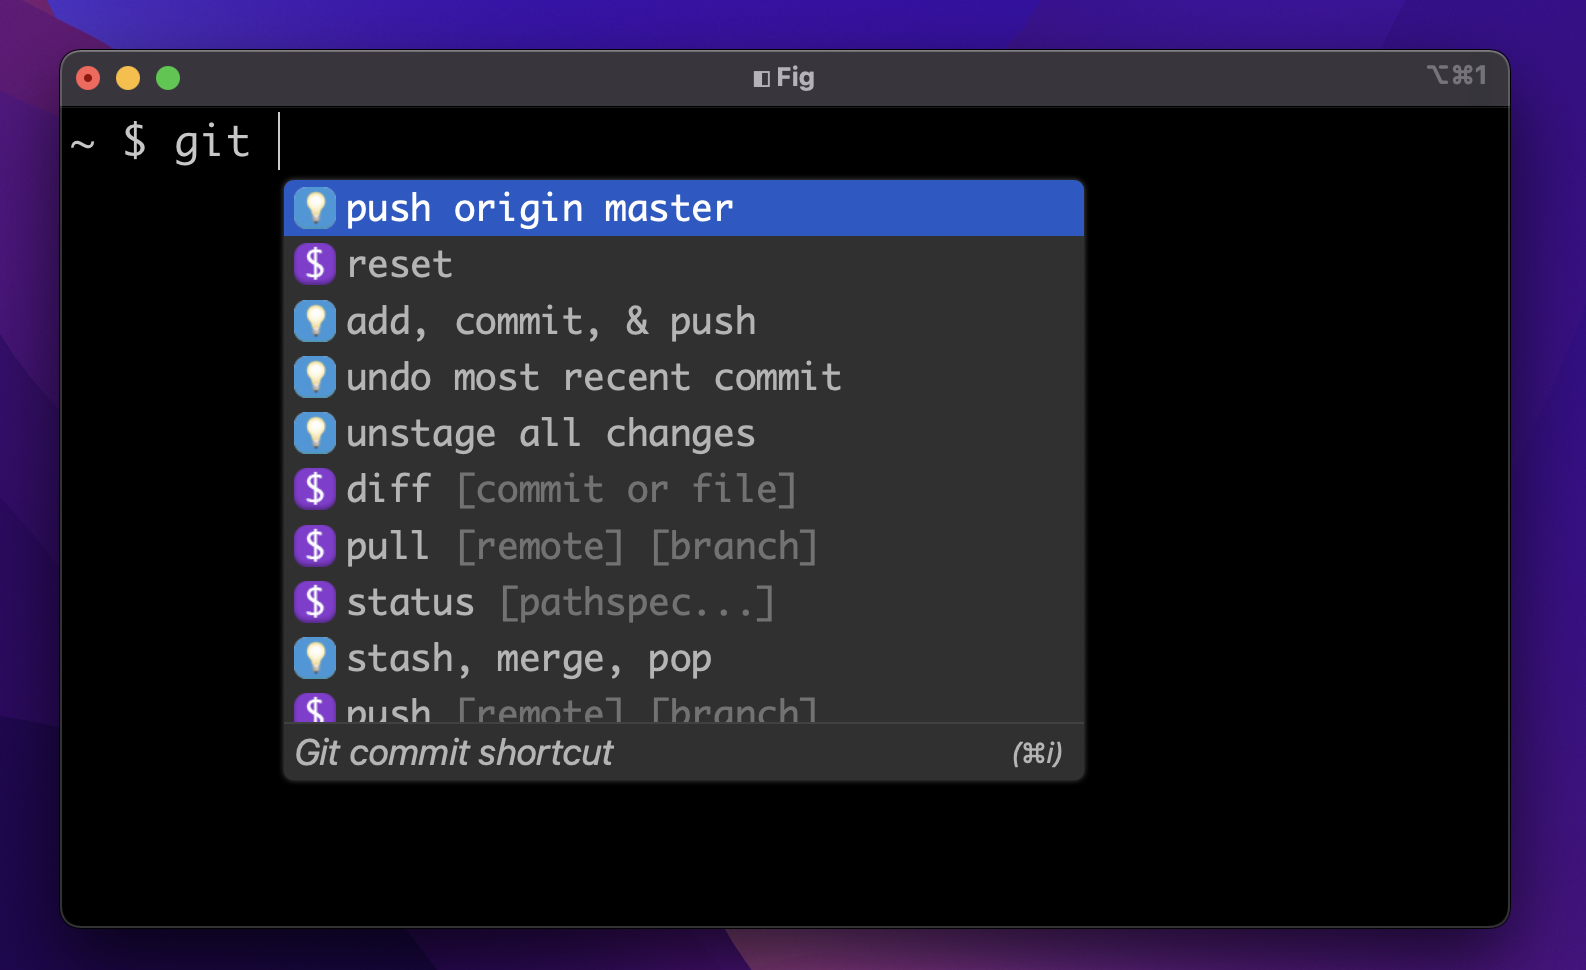 Fig Dashboard UI showing the Plugin Store landing page. It has a big banner showing the popular plugin 'oh my zsh' in rainbow text